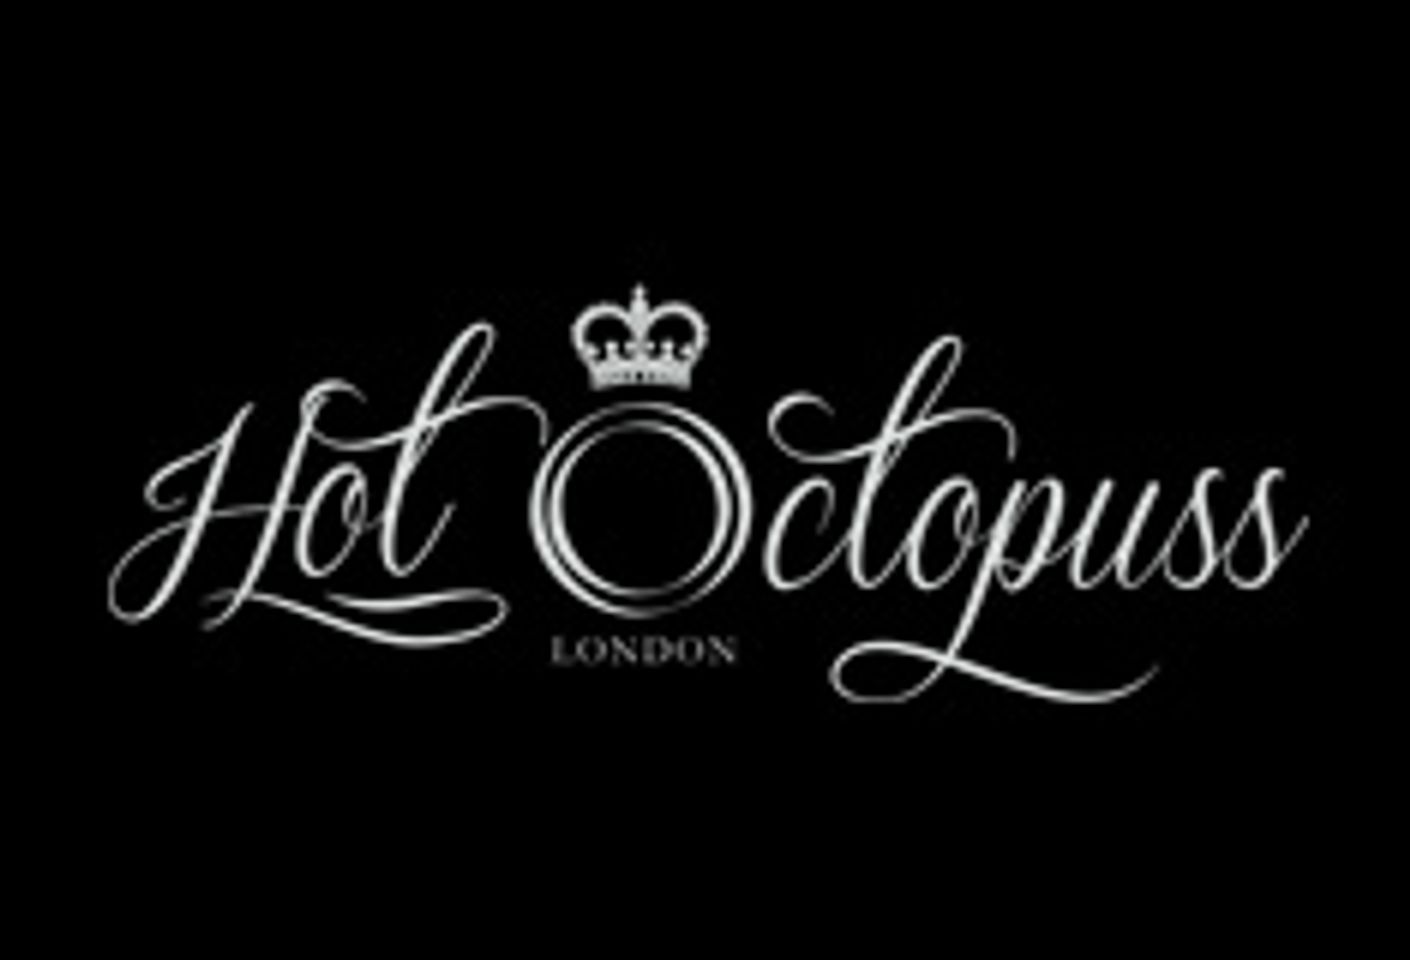 Hot Octopuss’ Pulse Nominated for Hot Product of the Year at StorErotica Awards